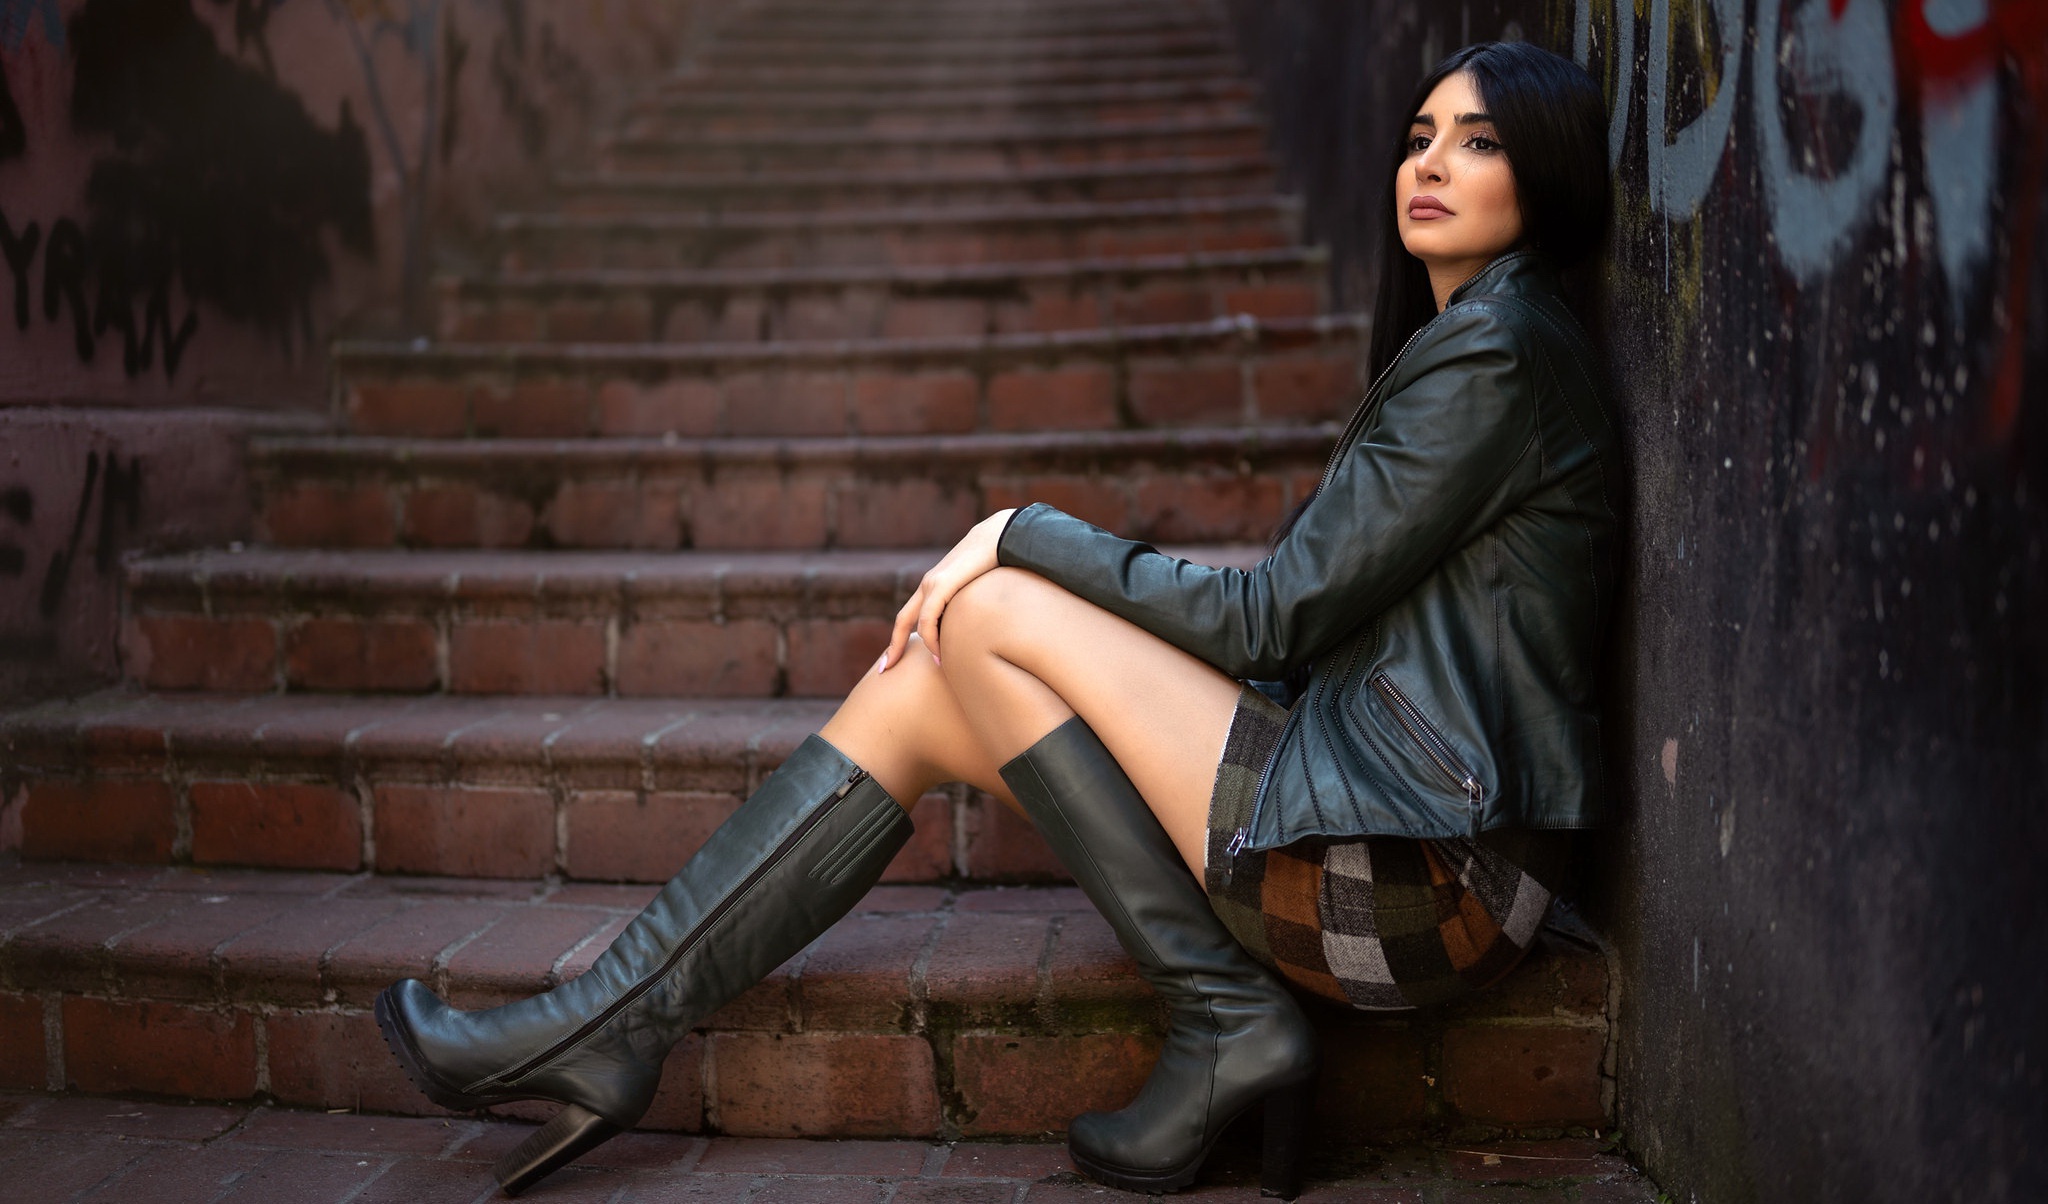 People 2048x1204 women model women outdoors urban sitting black hair makeup leather jacket stairs thighs boots heels high heeled boots looking into the distance dark hair hand on leg leather boots